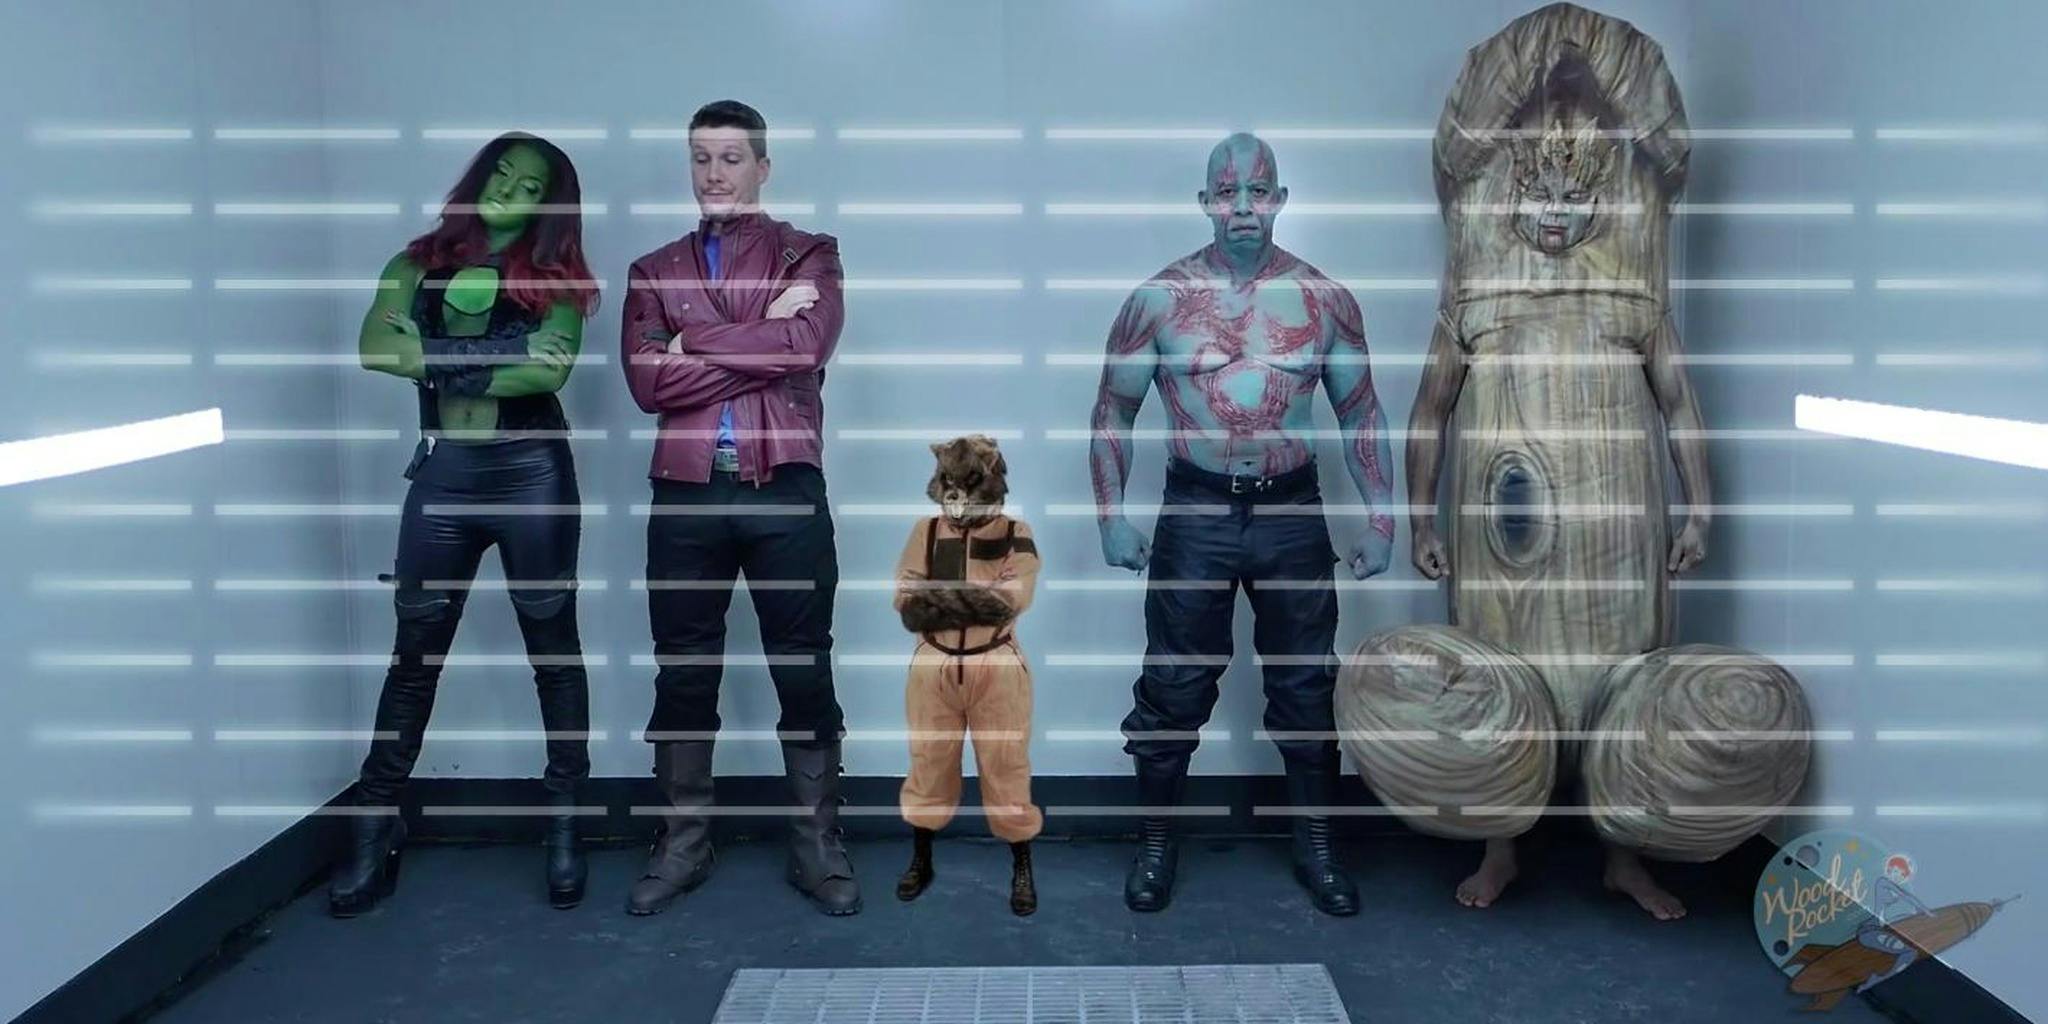 2048px x 1024px - The 7 craziest moments from the 'Guardians of the Galaxy' porno parody -  The Daily Dot